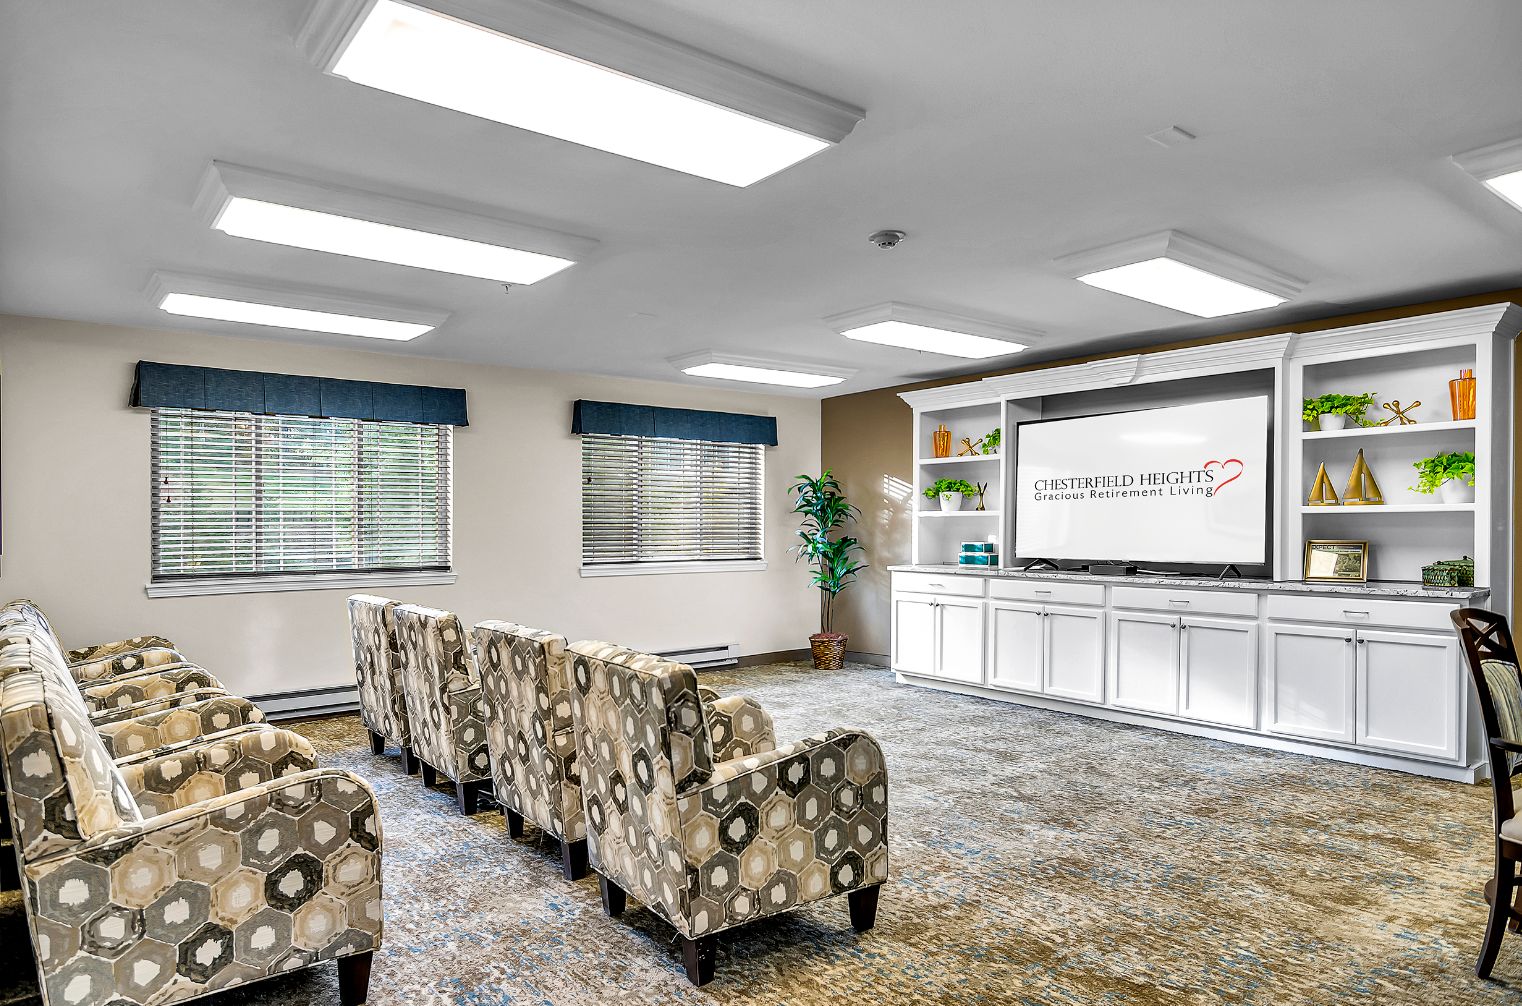 Chesterfield Heights Gracious Retirement Living 4